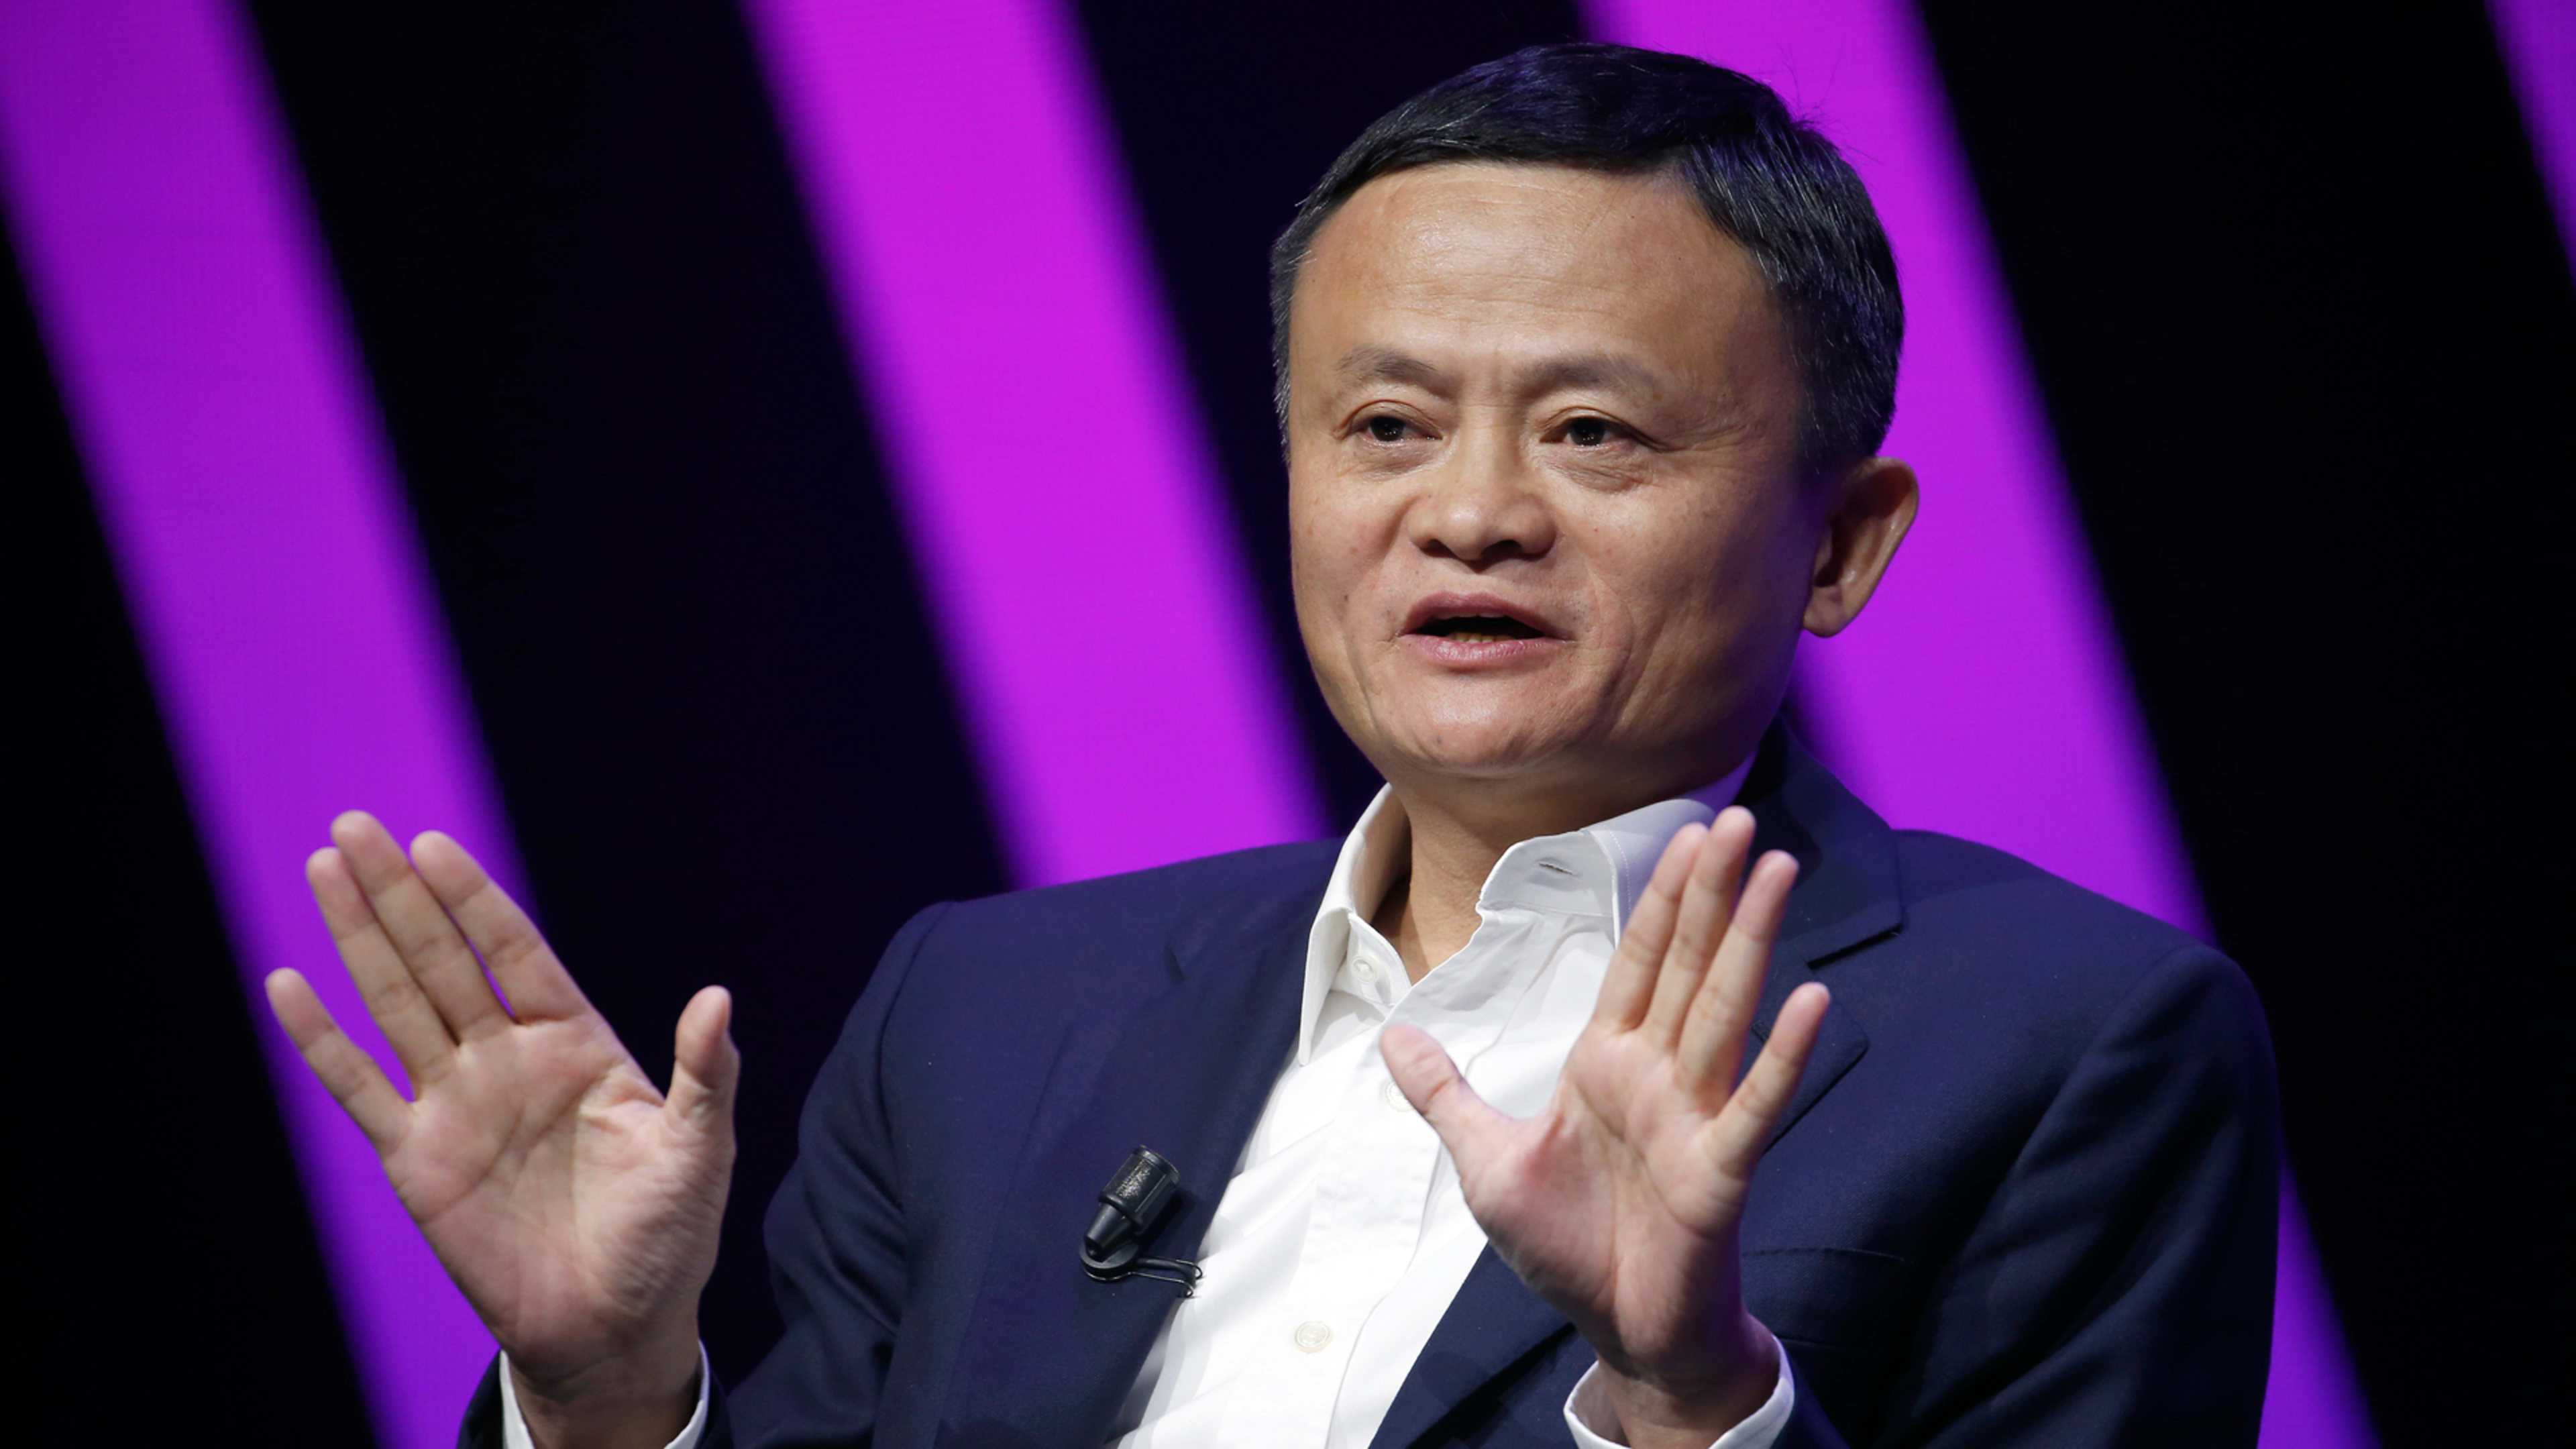 Alibaba chairman Jack Ma, who is China’s richest man, retires at age 55